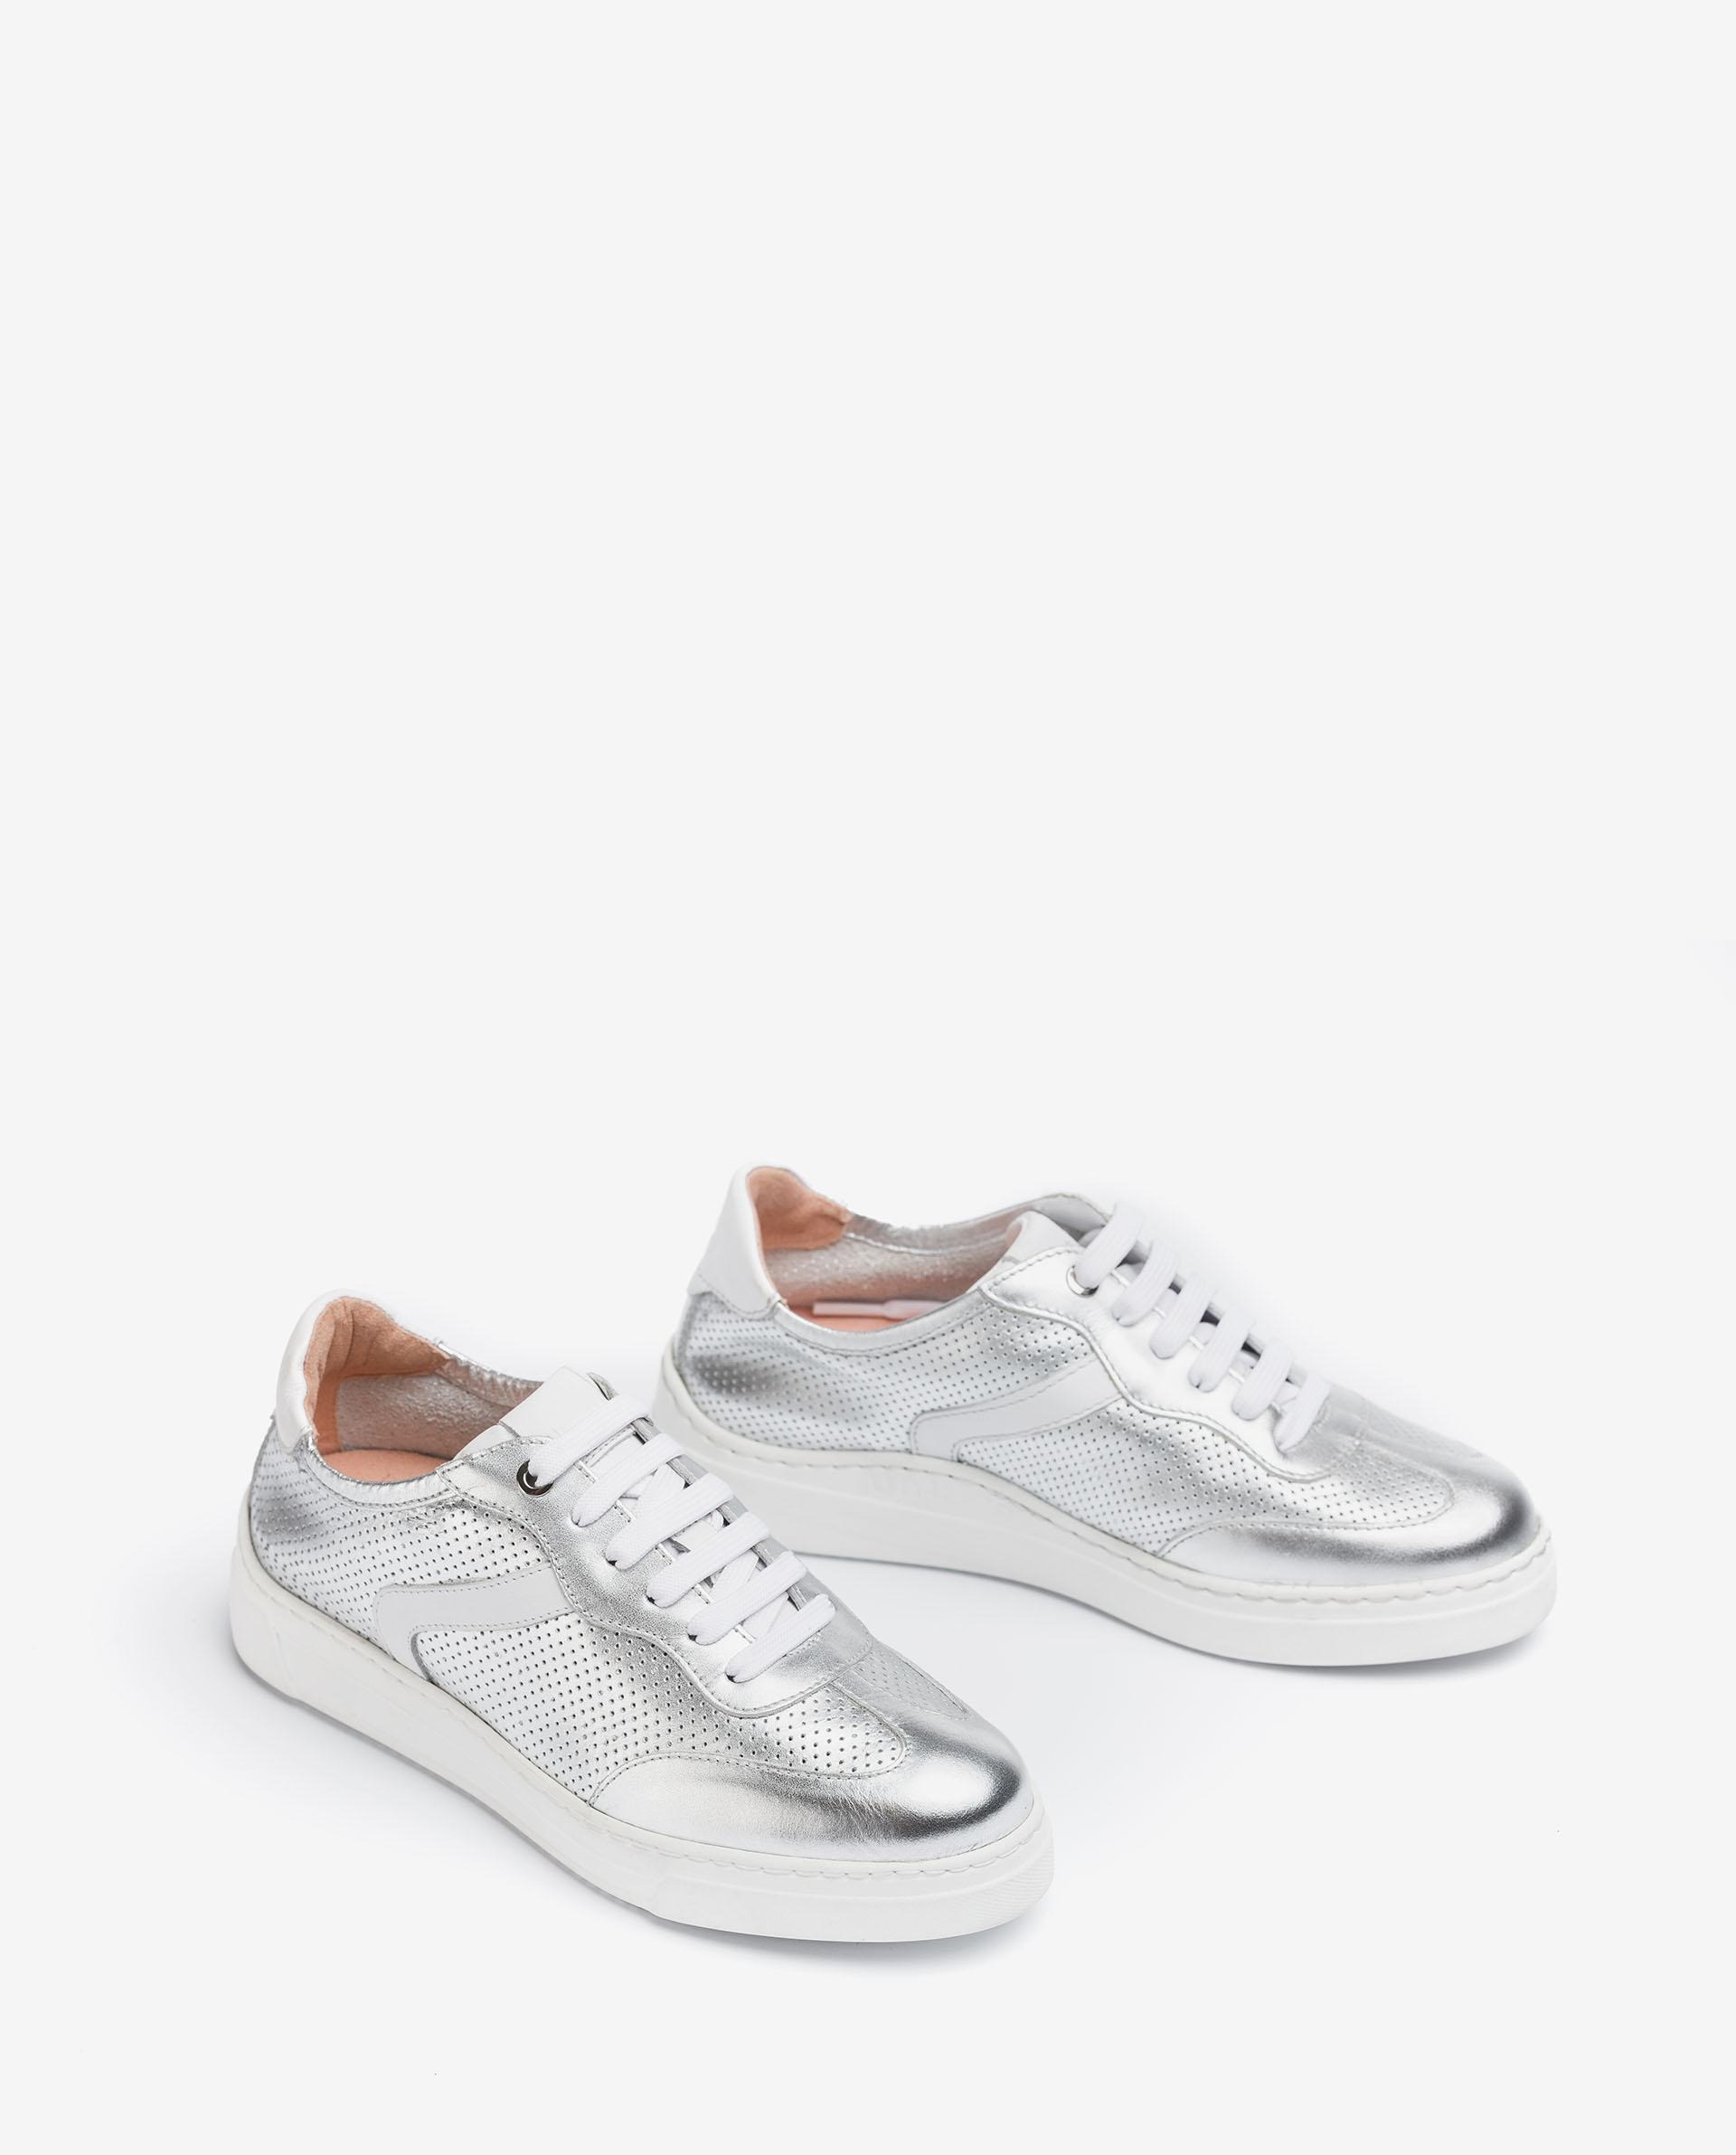 Unisa Chaussures de sport FUAD_NF SILVER/WHI